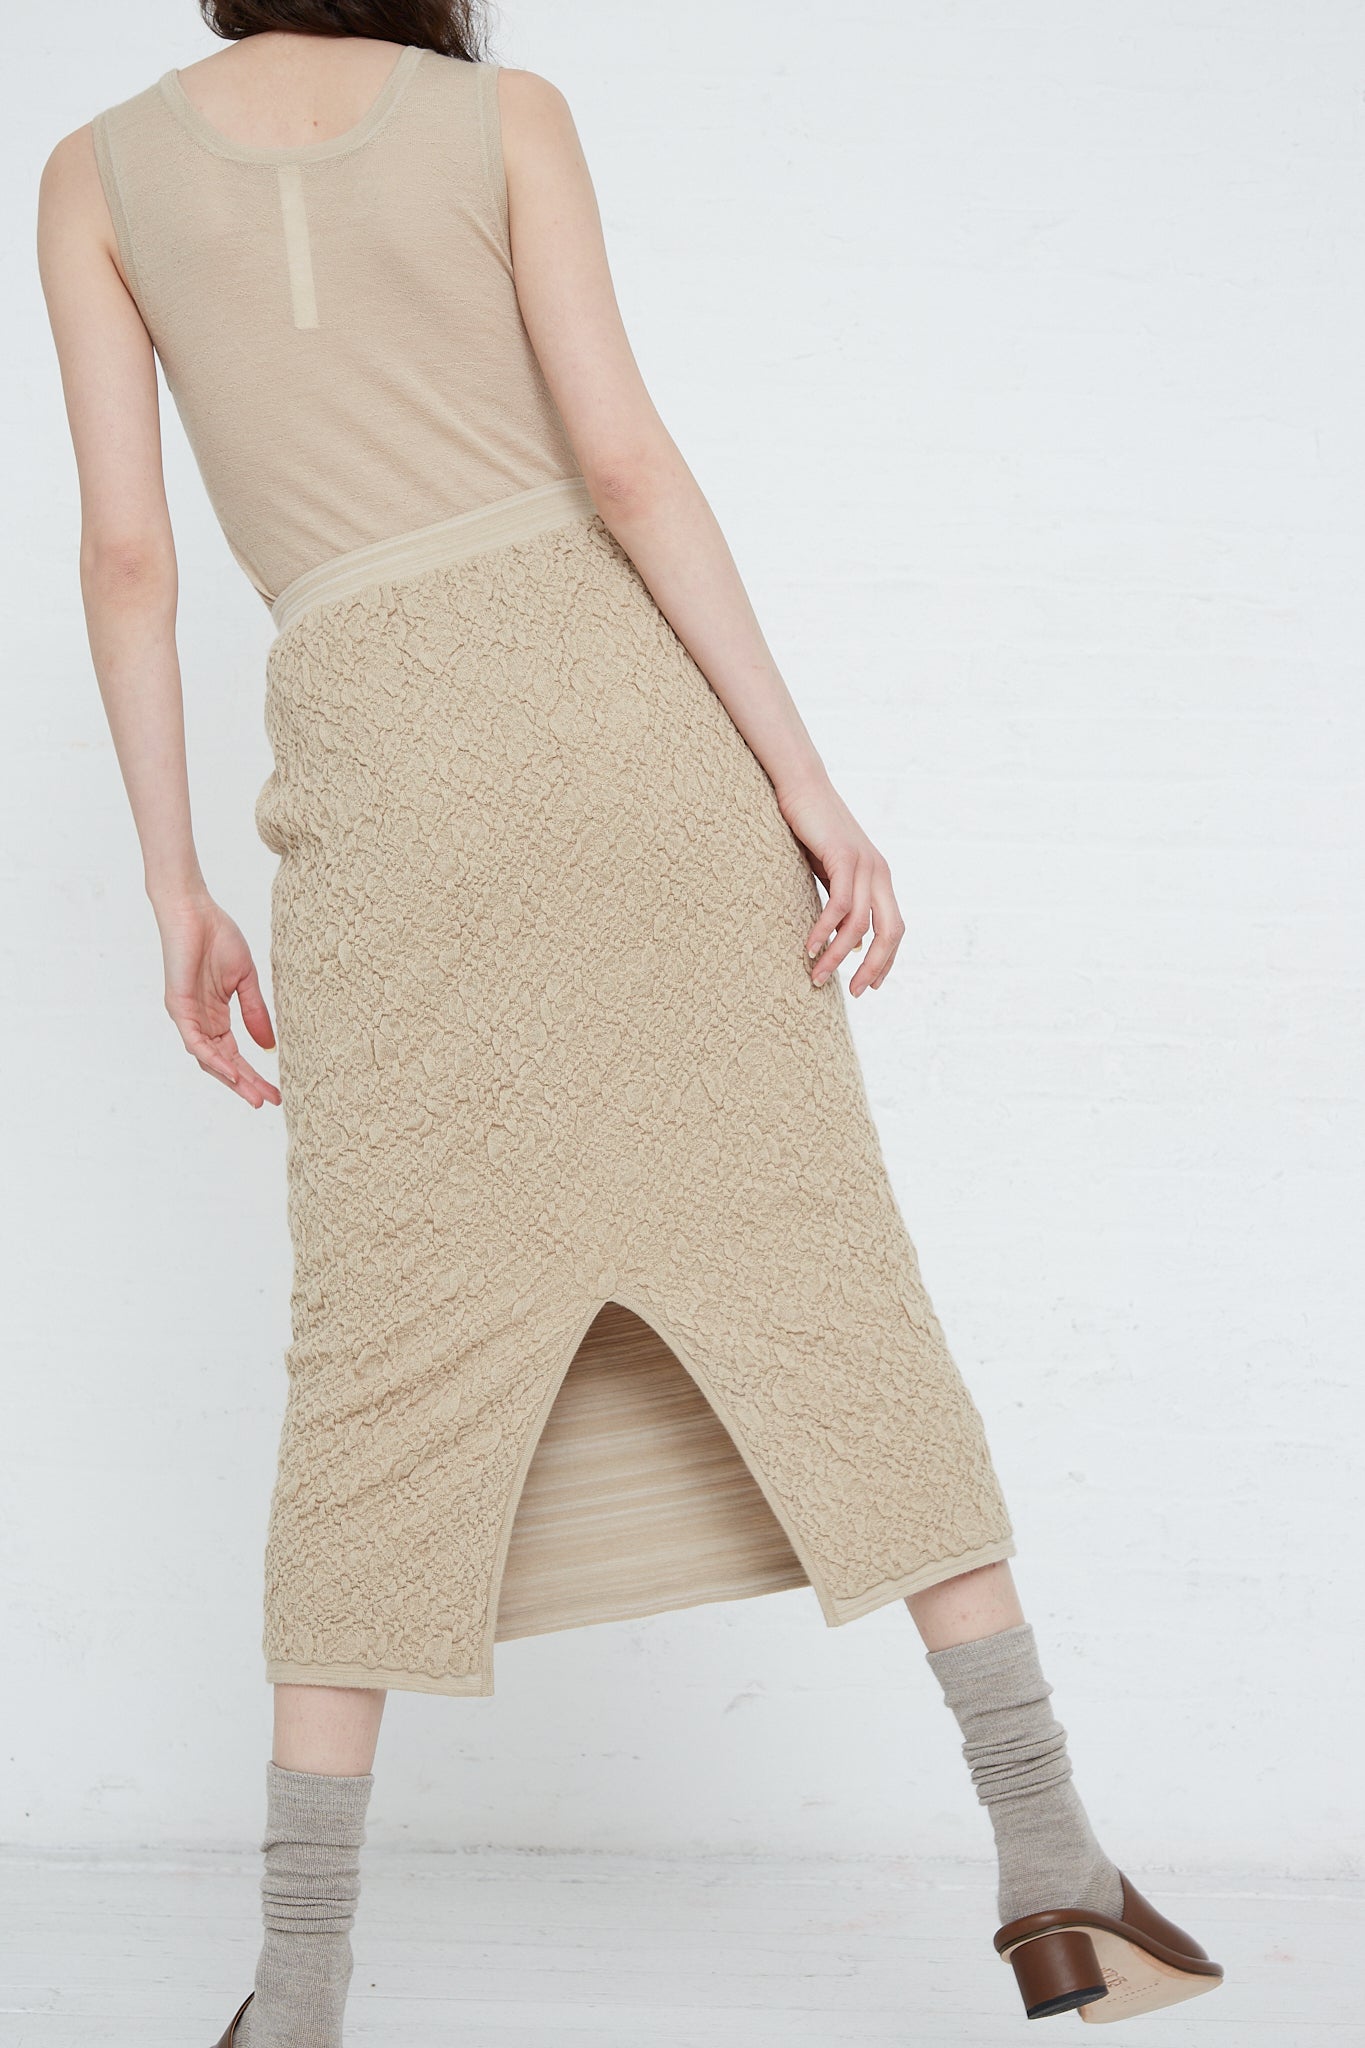 The model is wearing a Baby Alpaca Gauze Skirt in Antique by Lauren Manoogian with a slit. Back view.